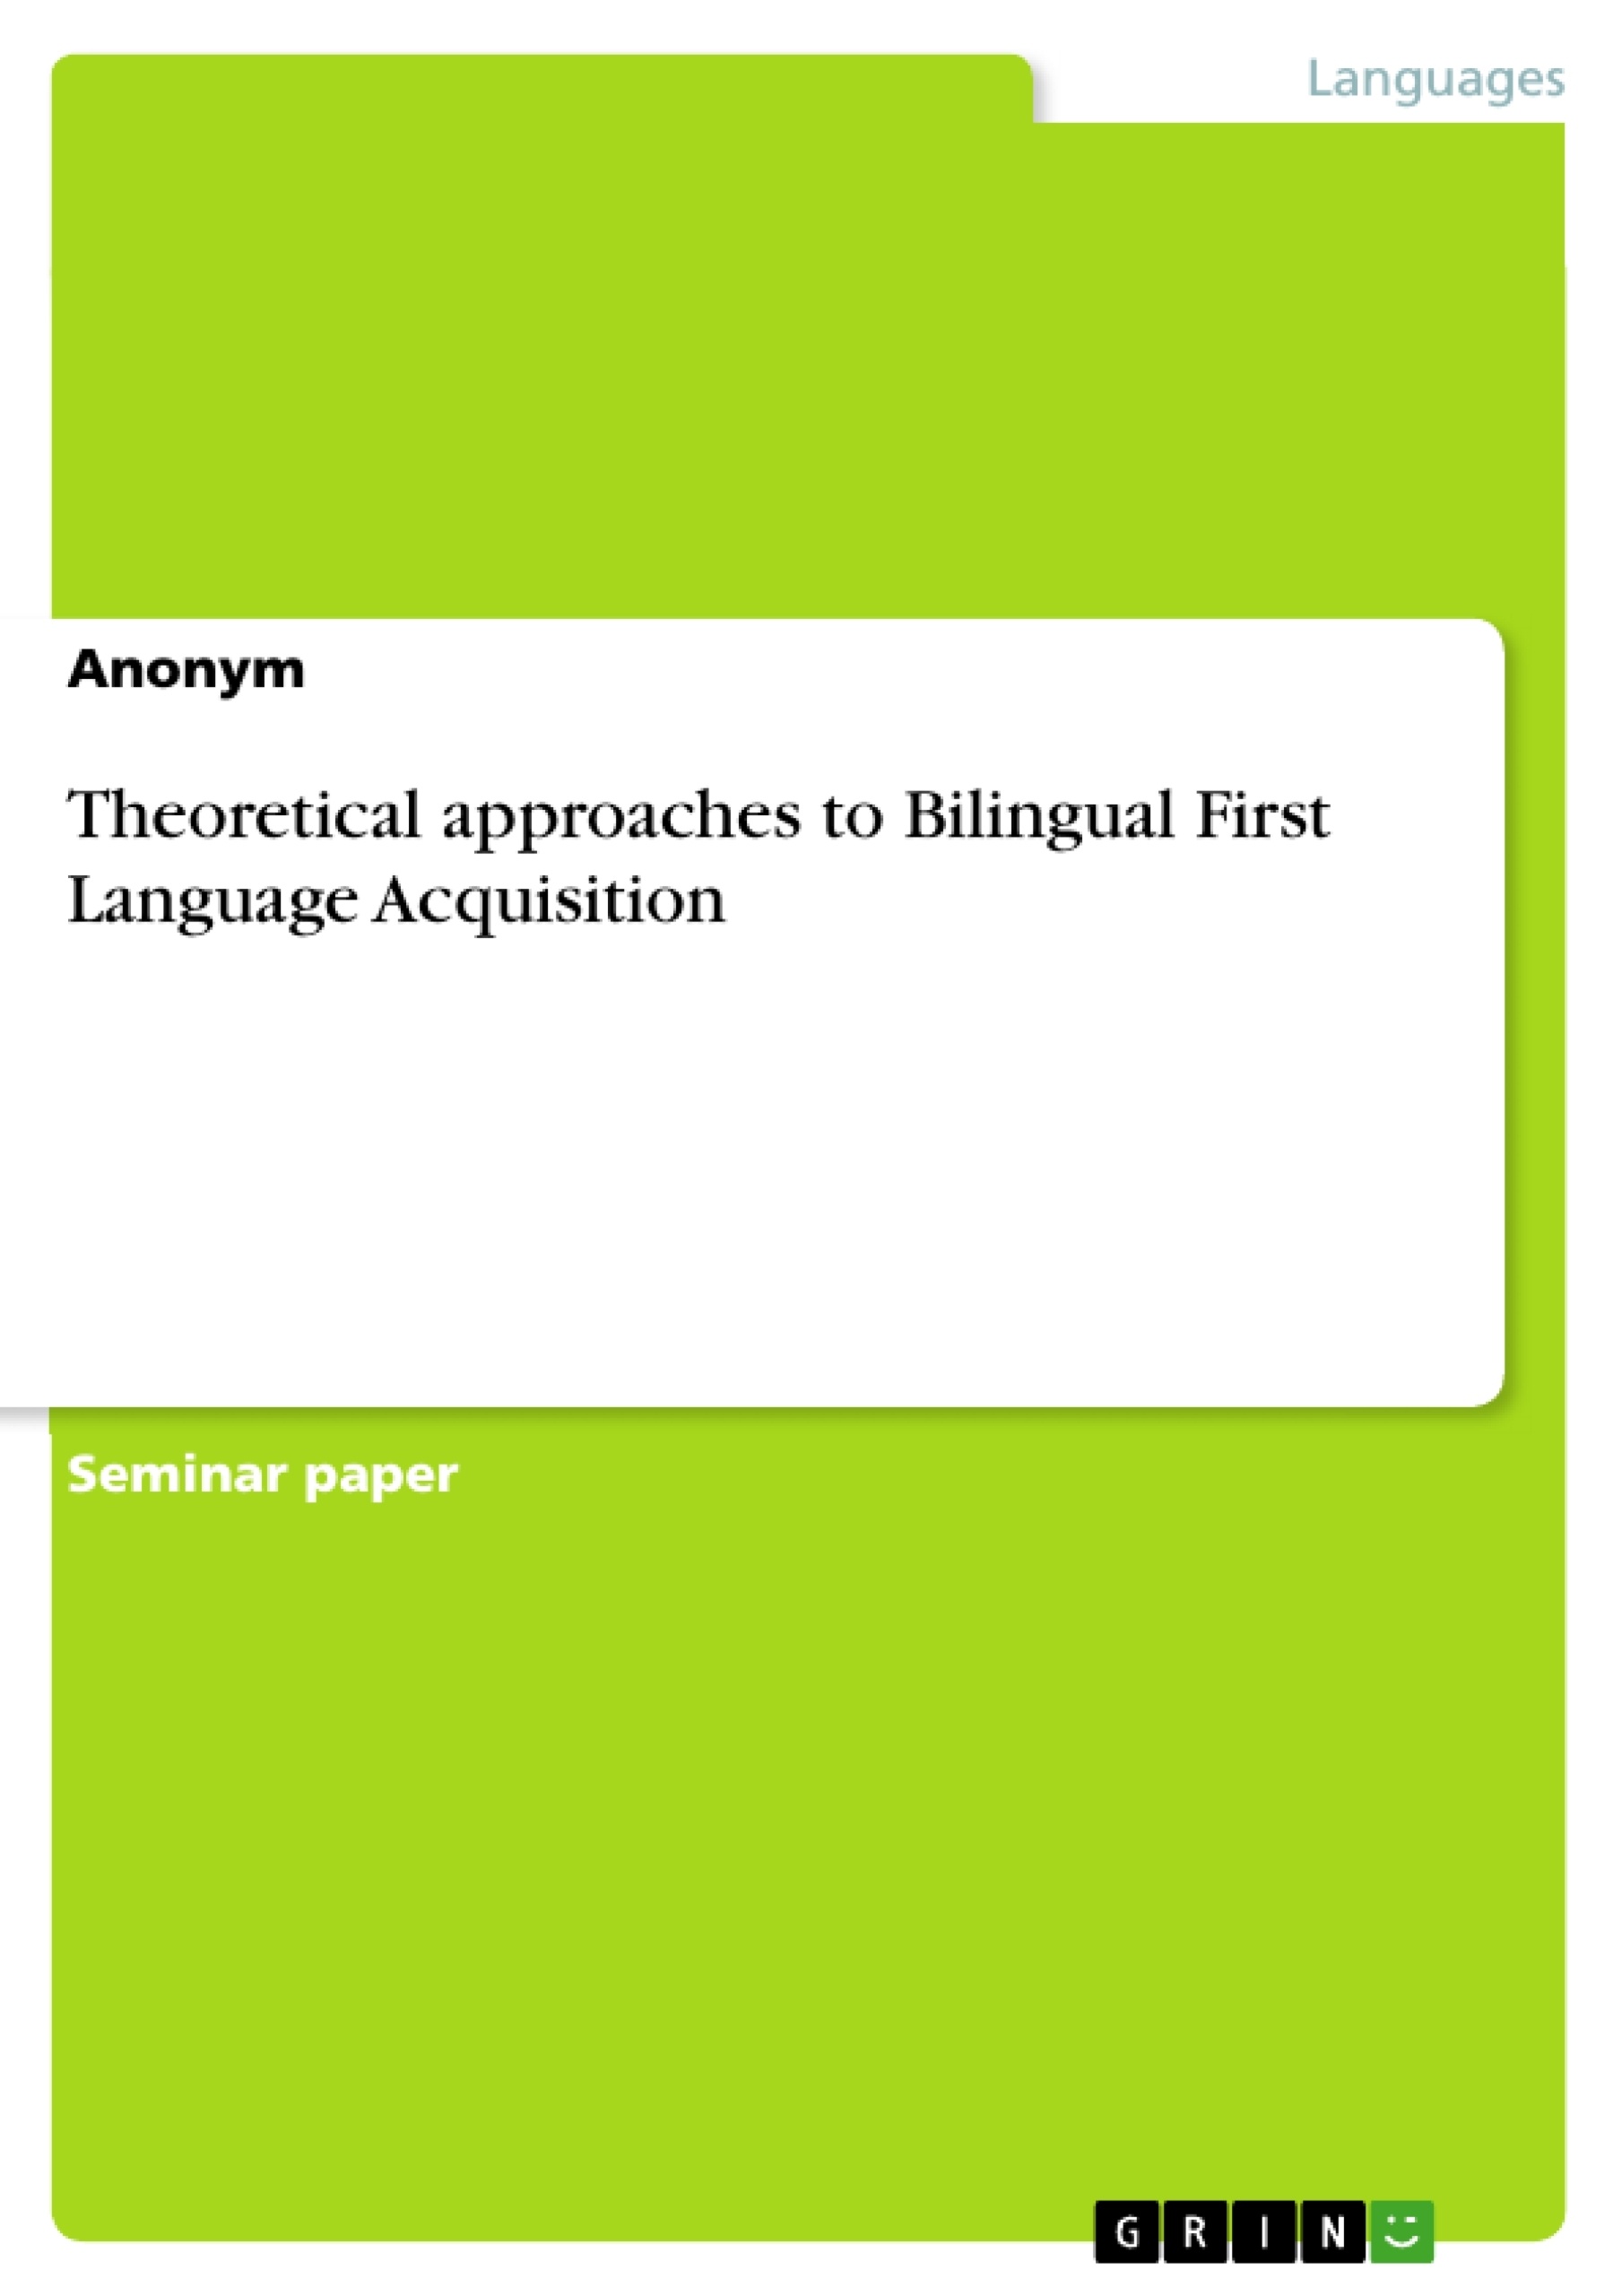 Title: Theoretical approaches to Bilingual First Language Acquisition